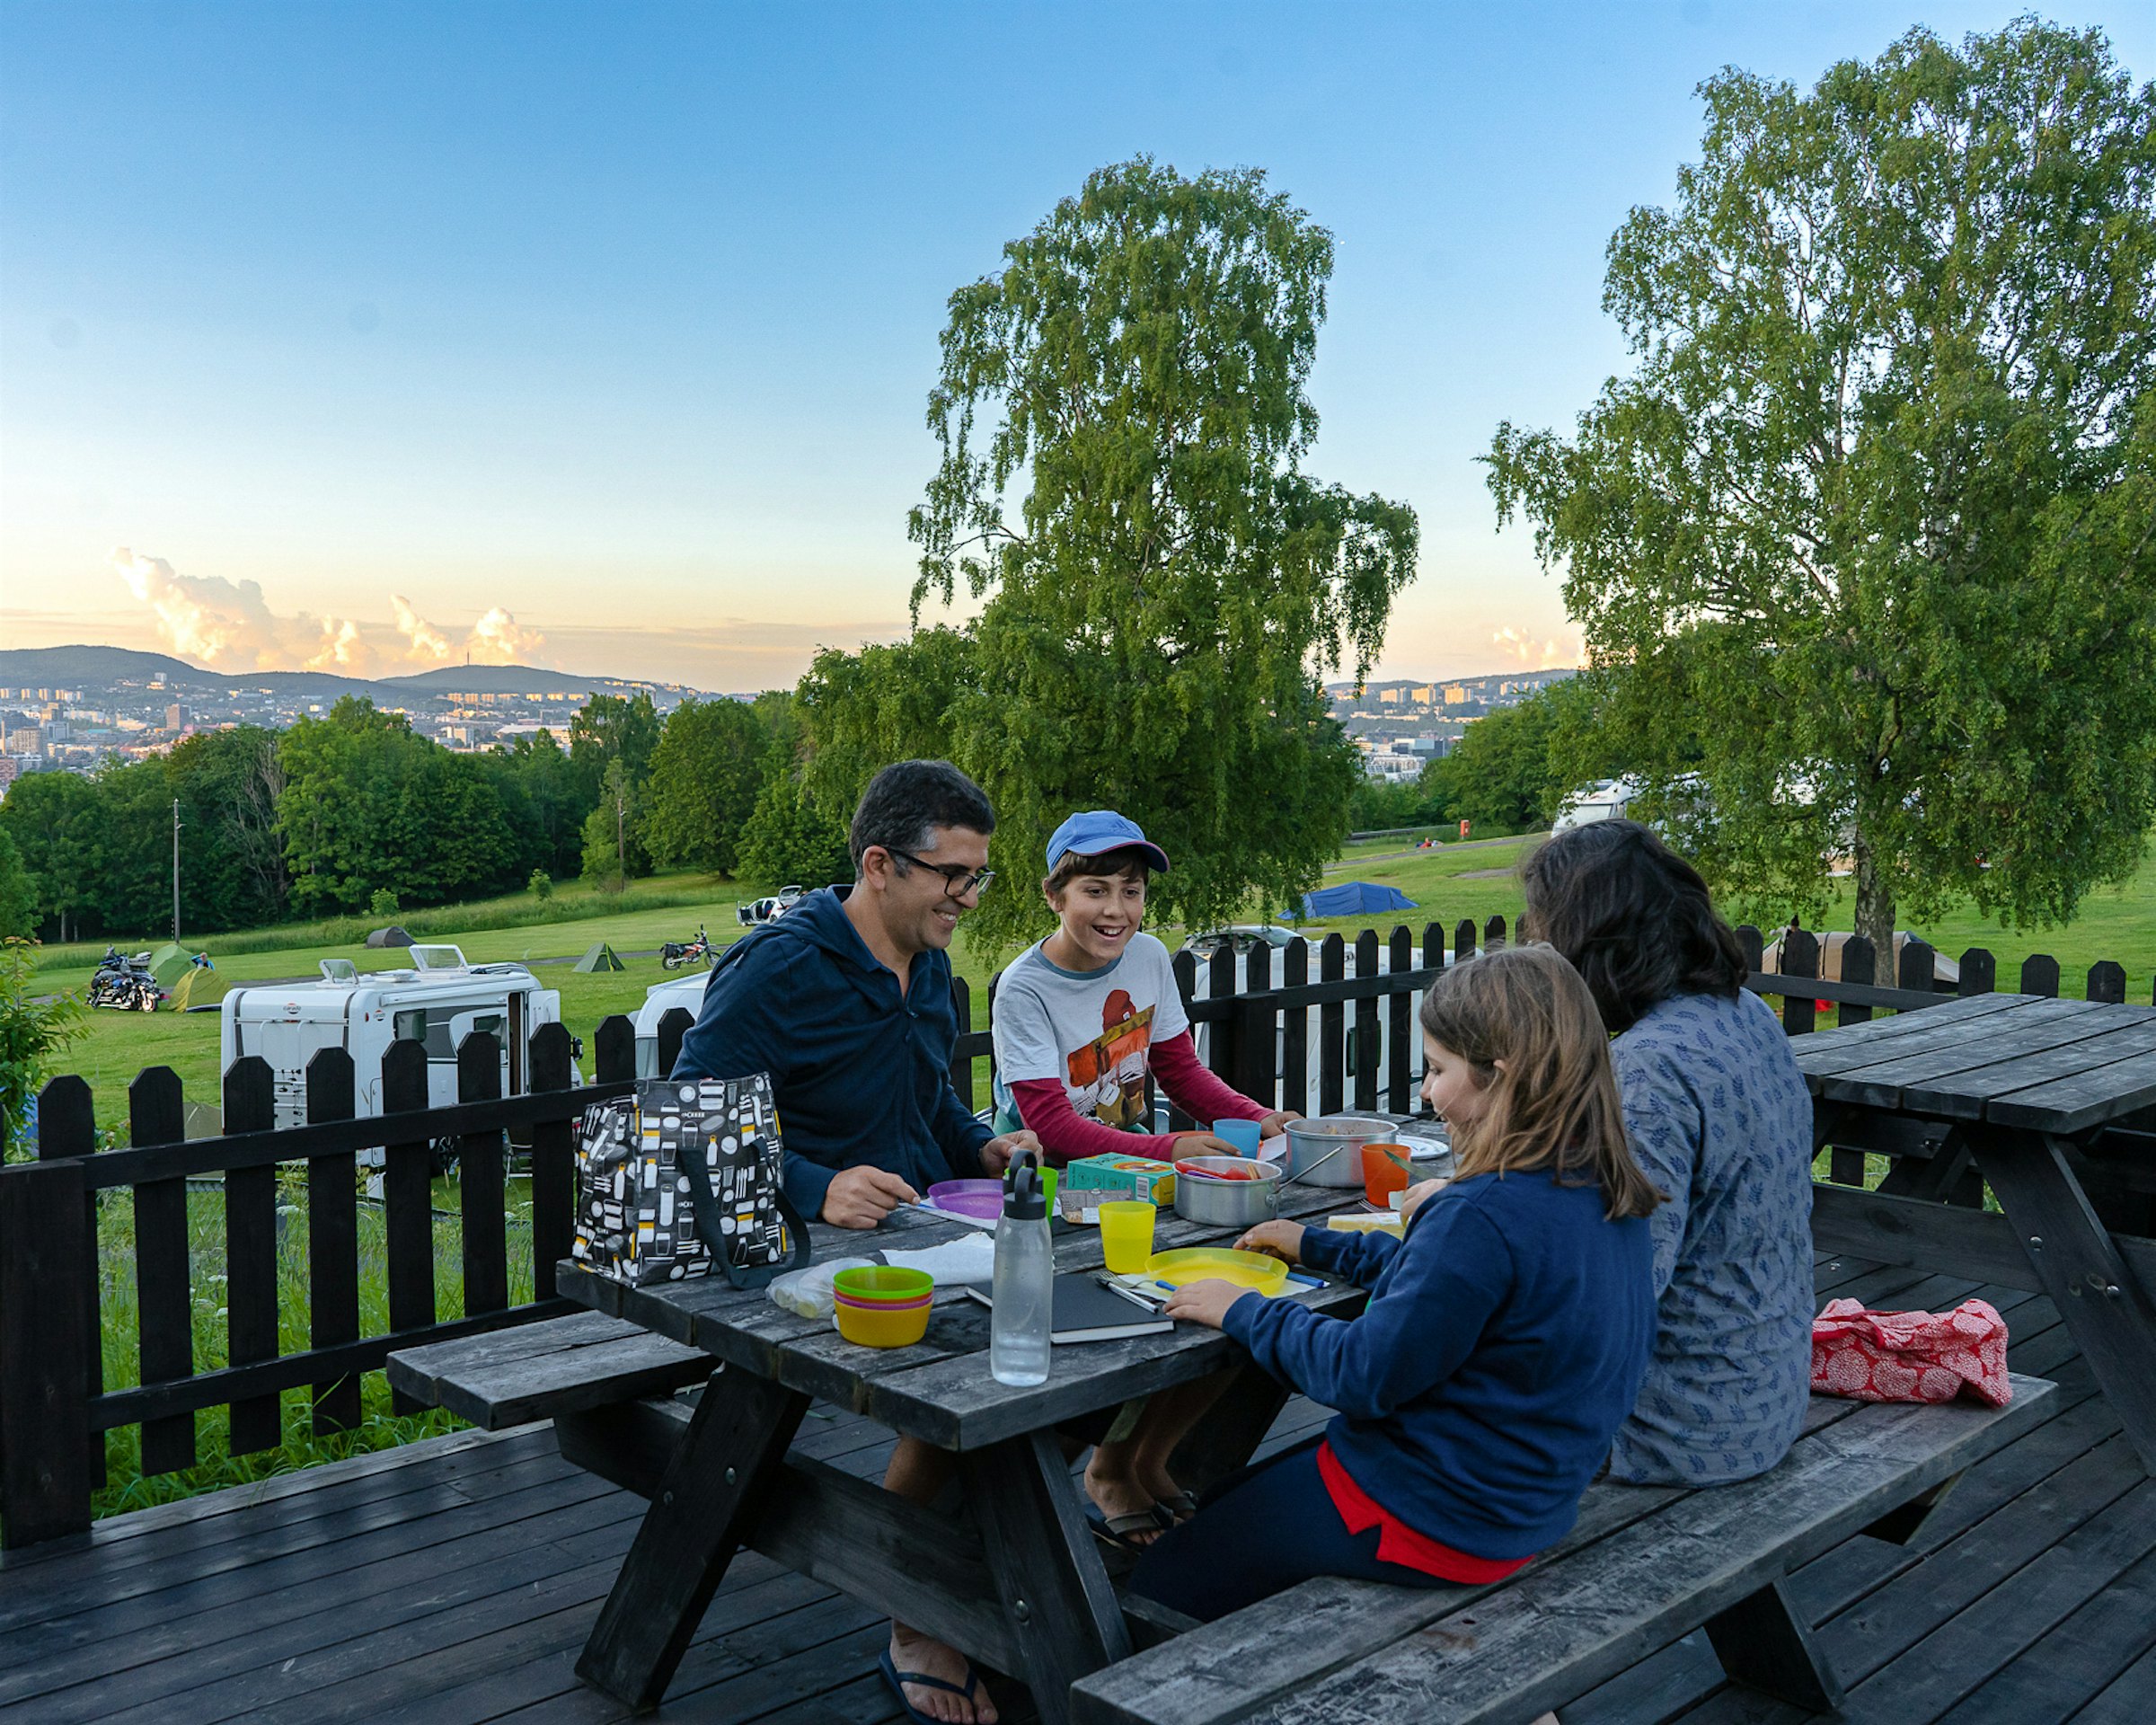 Family eating dinner outside in the evening sun and smiling, with a view of Oslo and camping in the background. Photo